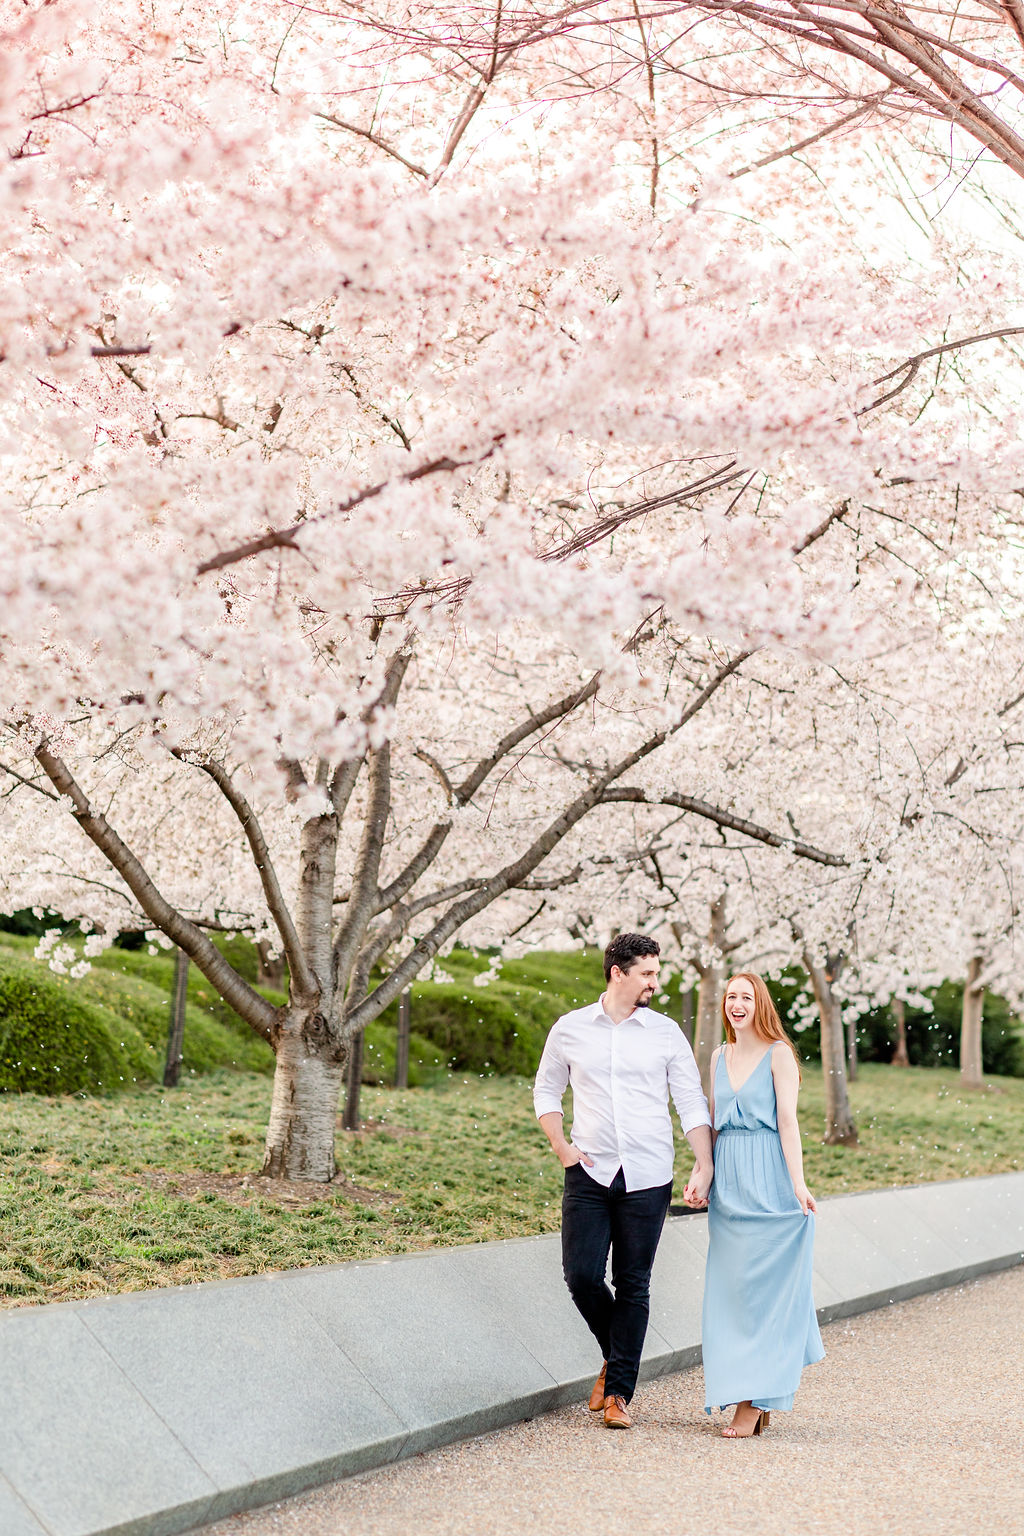 peak bloom cherry blossoms engagement, cherry blossoms engagement photos, DC peak bloom cherry blossoms, DC cherry blossoms photography, DC cherry blossoms photographer, ethereal cherry blossoms photos, DC cherry blossoms, Rachel E.H. Photography, couple holding hands, couple walking on path, cherry blossom petals falling